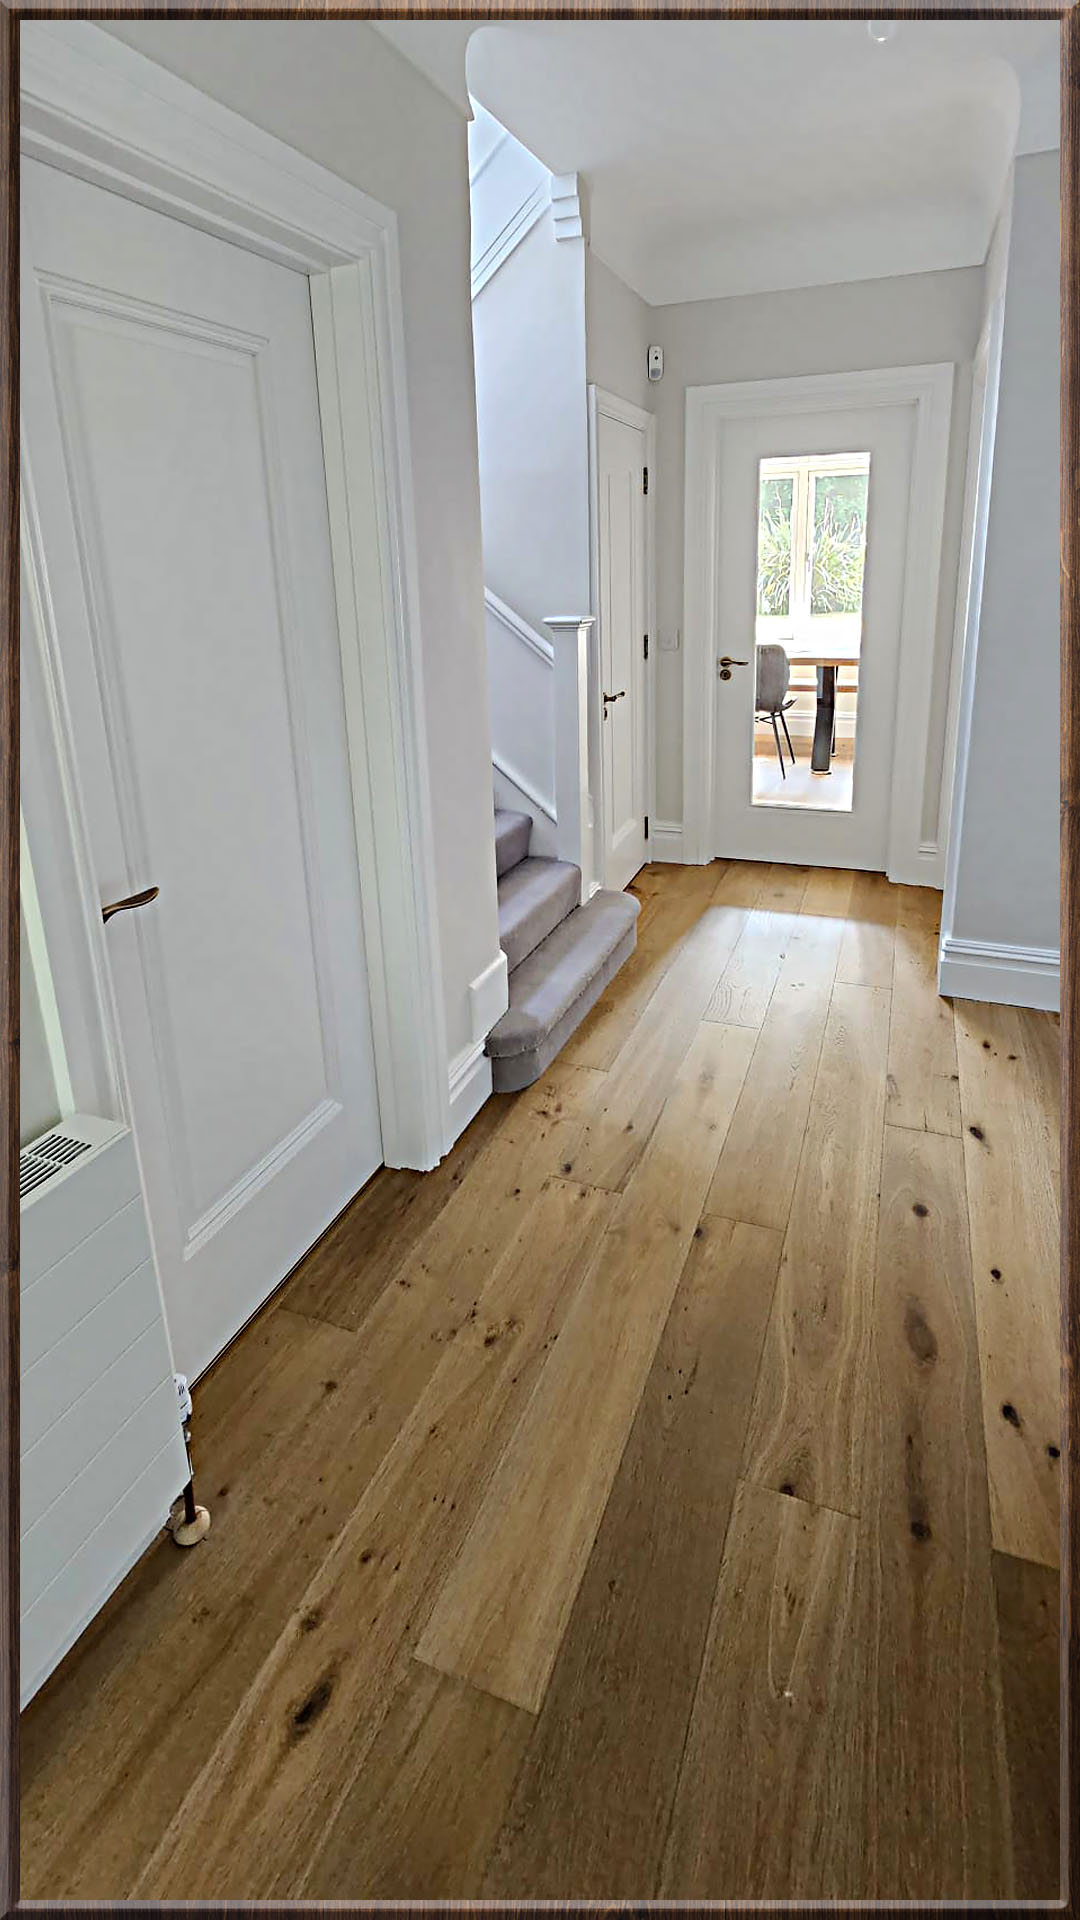 BG Carpentry Services fitted floors